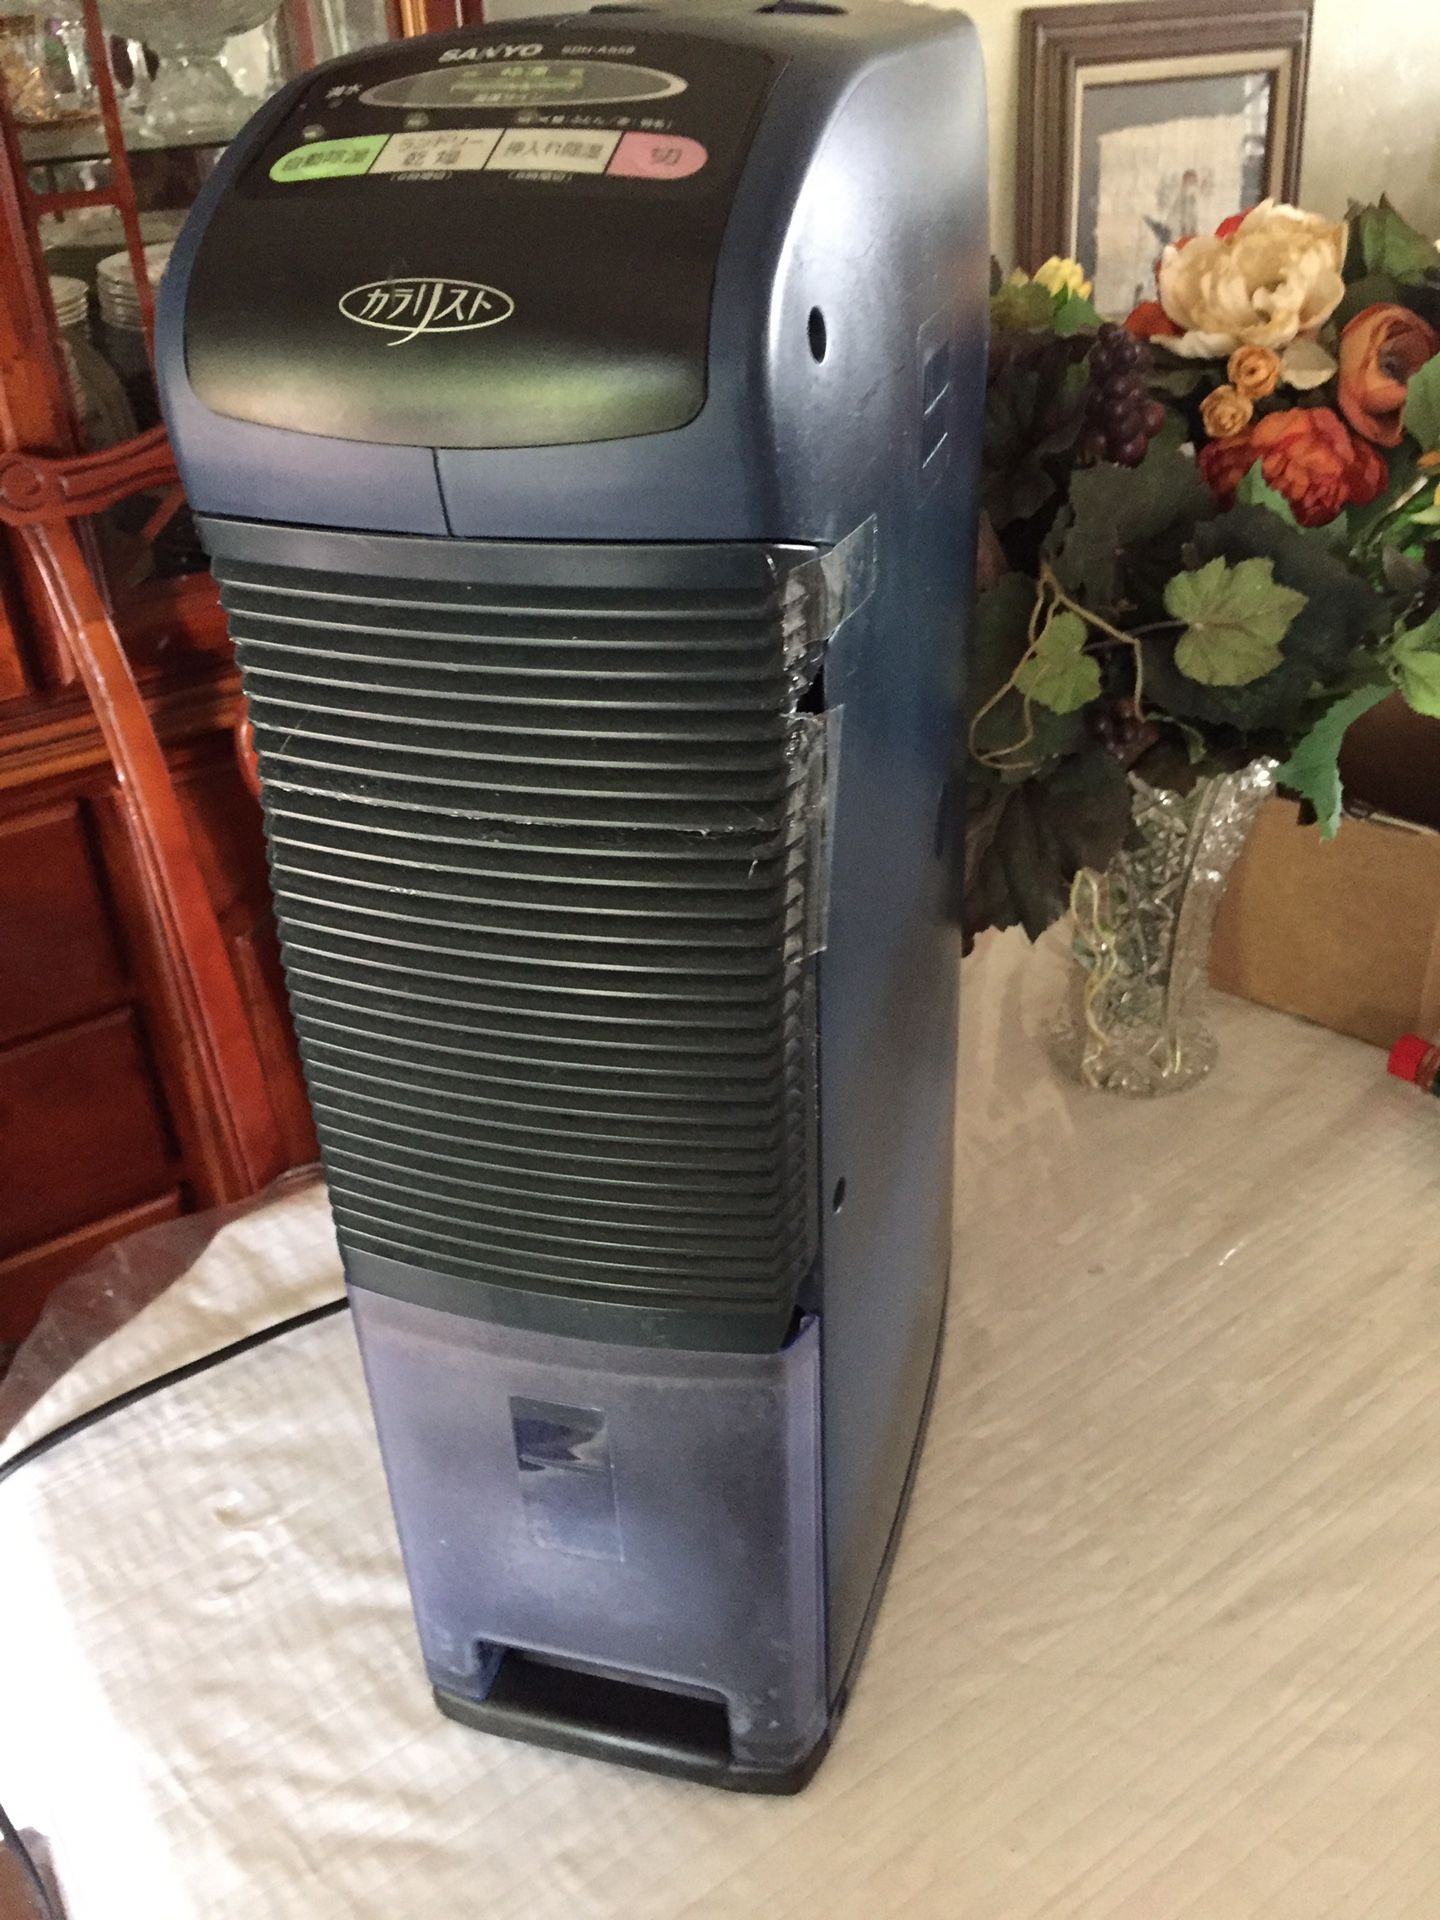 Sanyo DEHUMIDIFIER SMALL SIZE MADE IN JAPAN WORKS PERFECTLY